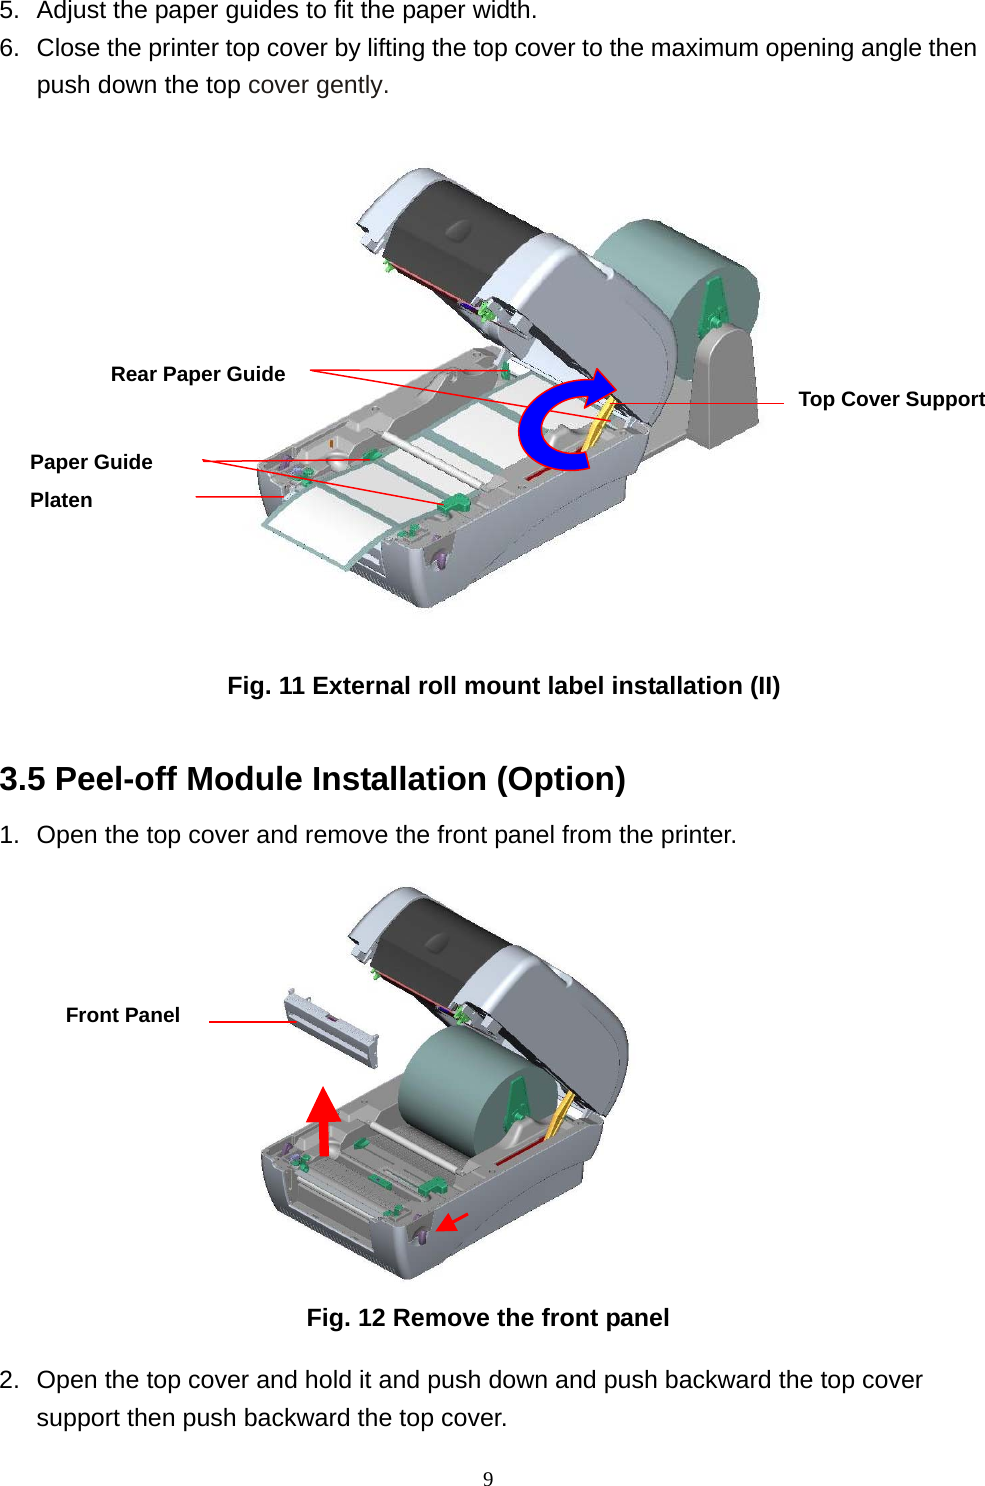  95.  Adjust the paper guides to fit the paper width. 6.  Close the printer top cover by lifting the top cover to the maximum opening angle then push down the top cover gently.                  Fig. 11 External roll mount label installation (II)  3.5 Peel-off Module Installation (Option) 1.  Open the top cover and remove the front panel from the printer.                 Fig. 12 Remove the front panel  2.  Open the top cover and hold it and push down and push backward the top cover support then push backward the top cover.     Paper Guide Platen Rear Paper Guide Front Panel Top Cover Support